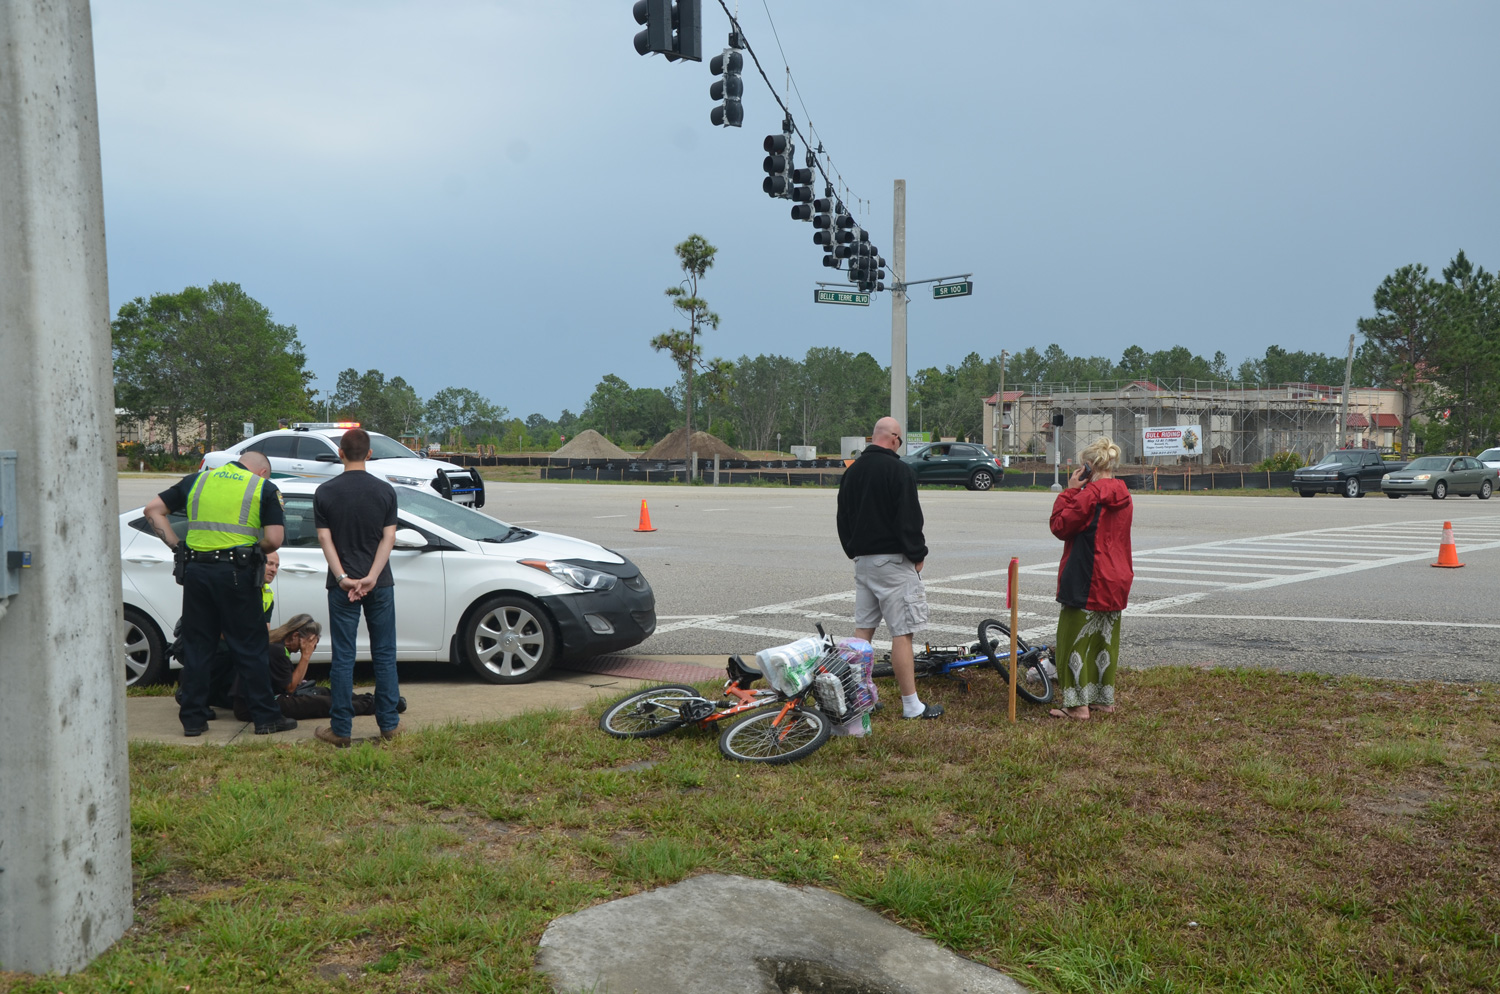 The cyclist's roommate, left, arrived at the scene about half an our after the crash and was greatly distraught, eventually requiring the intervention of paramedics, but she was not taken to a hospital. Her bicycle is in the foreground, the victim's, which was struck, is nearer the road. Click on the image for larger view. (c FlaglerLive)